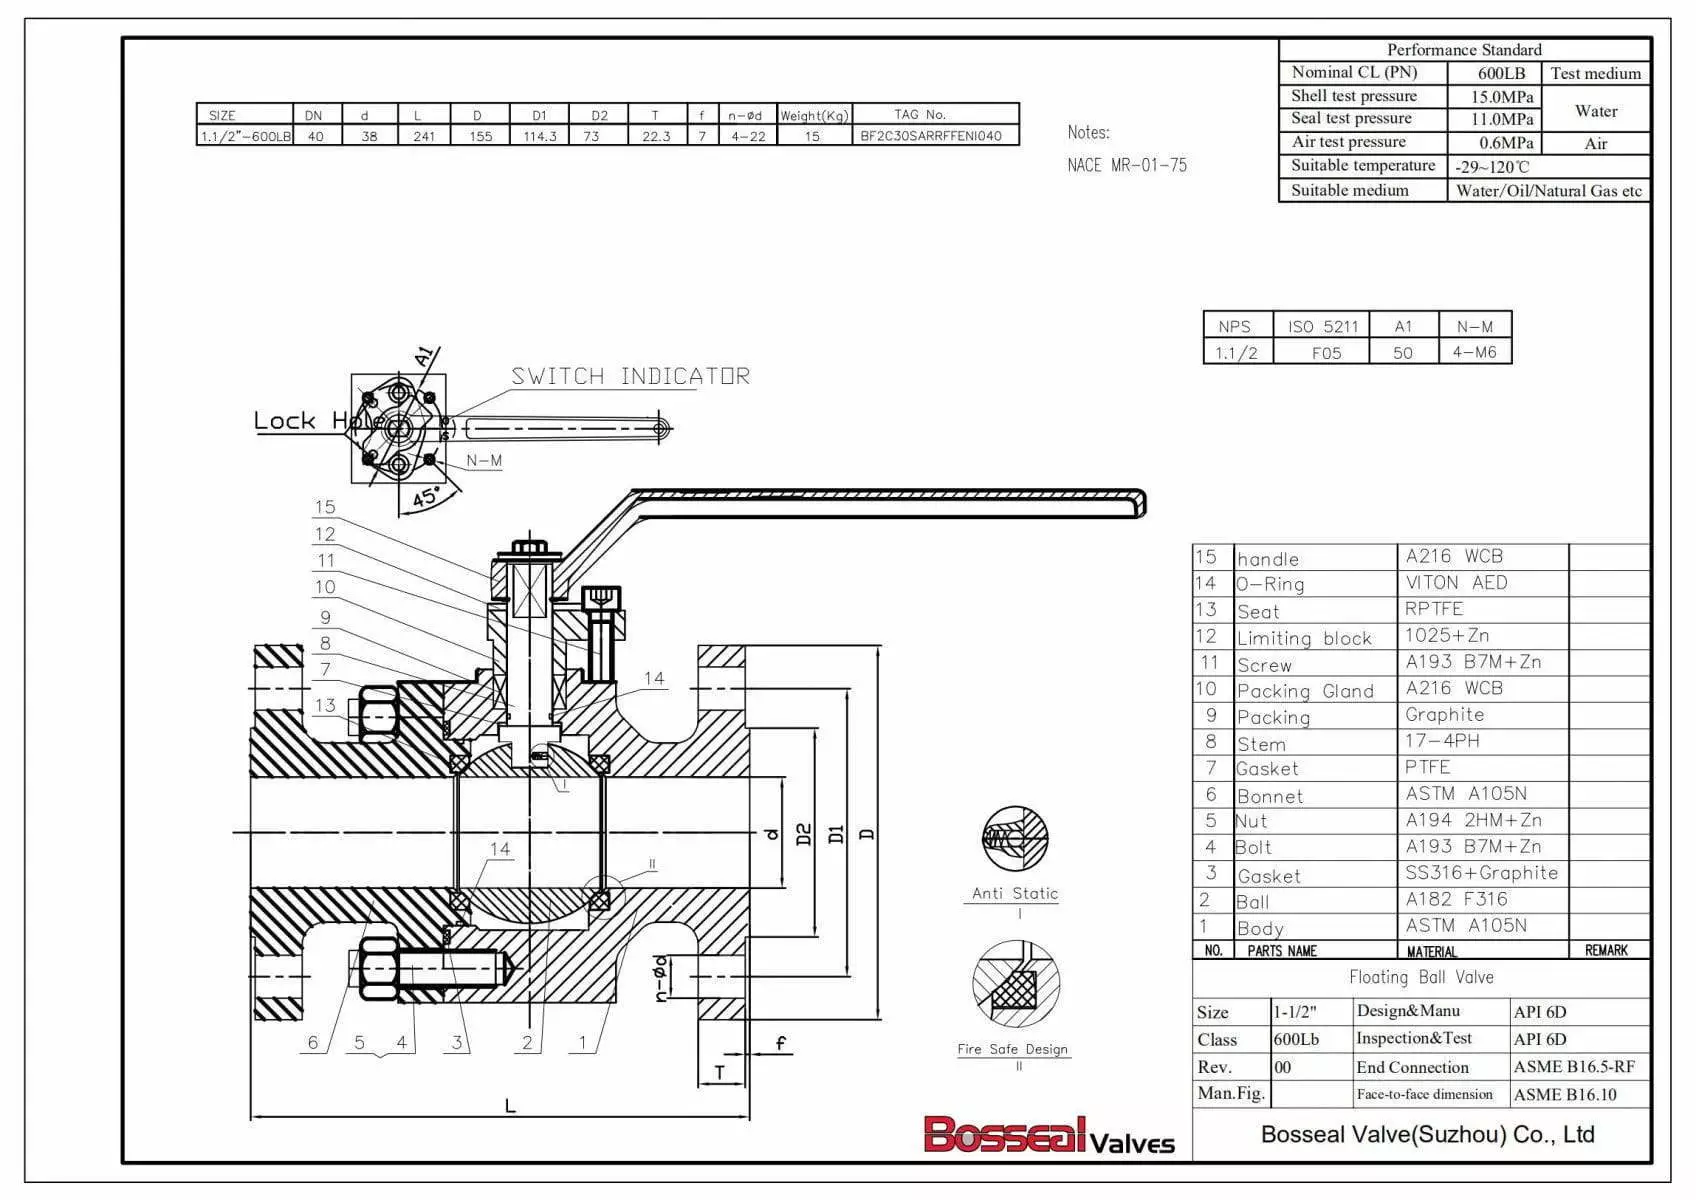 ASTM A105 Floating Ball Valve Tech Drawing